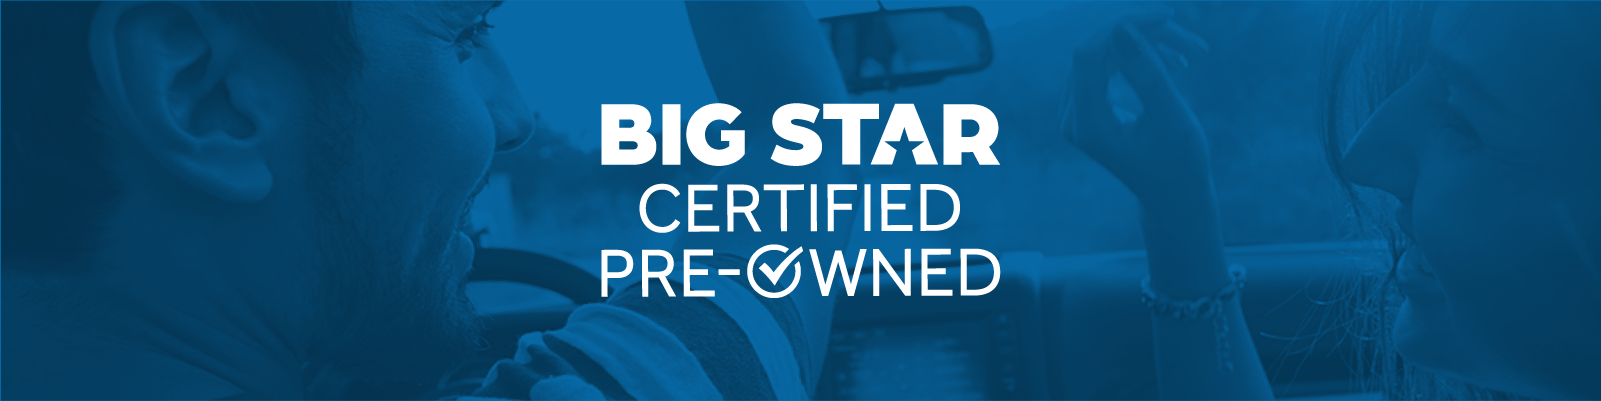 Big Star Certified Pre-Owned